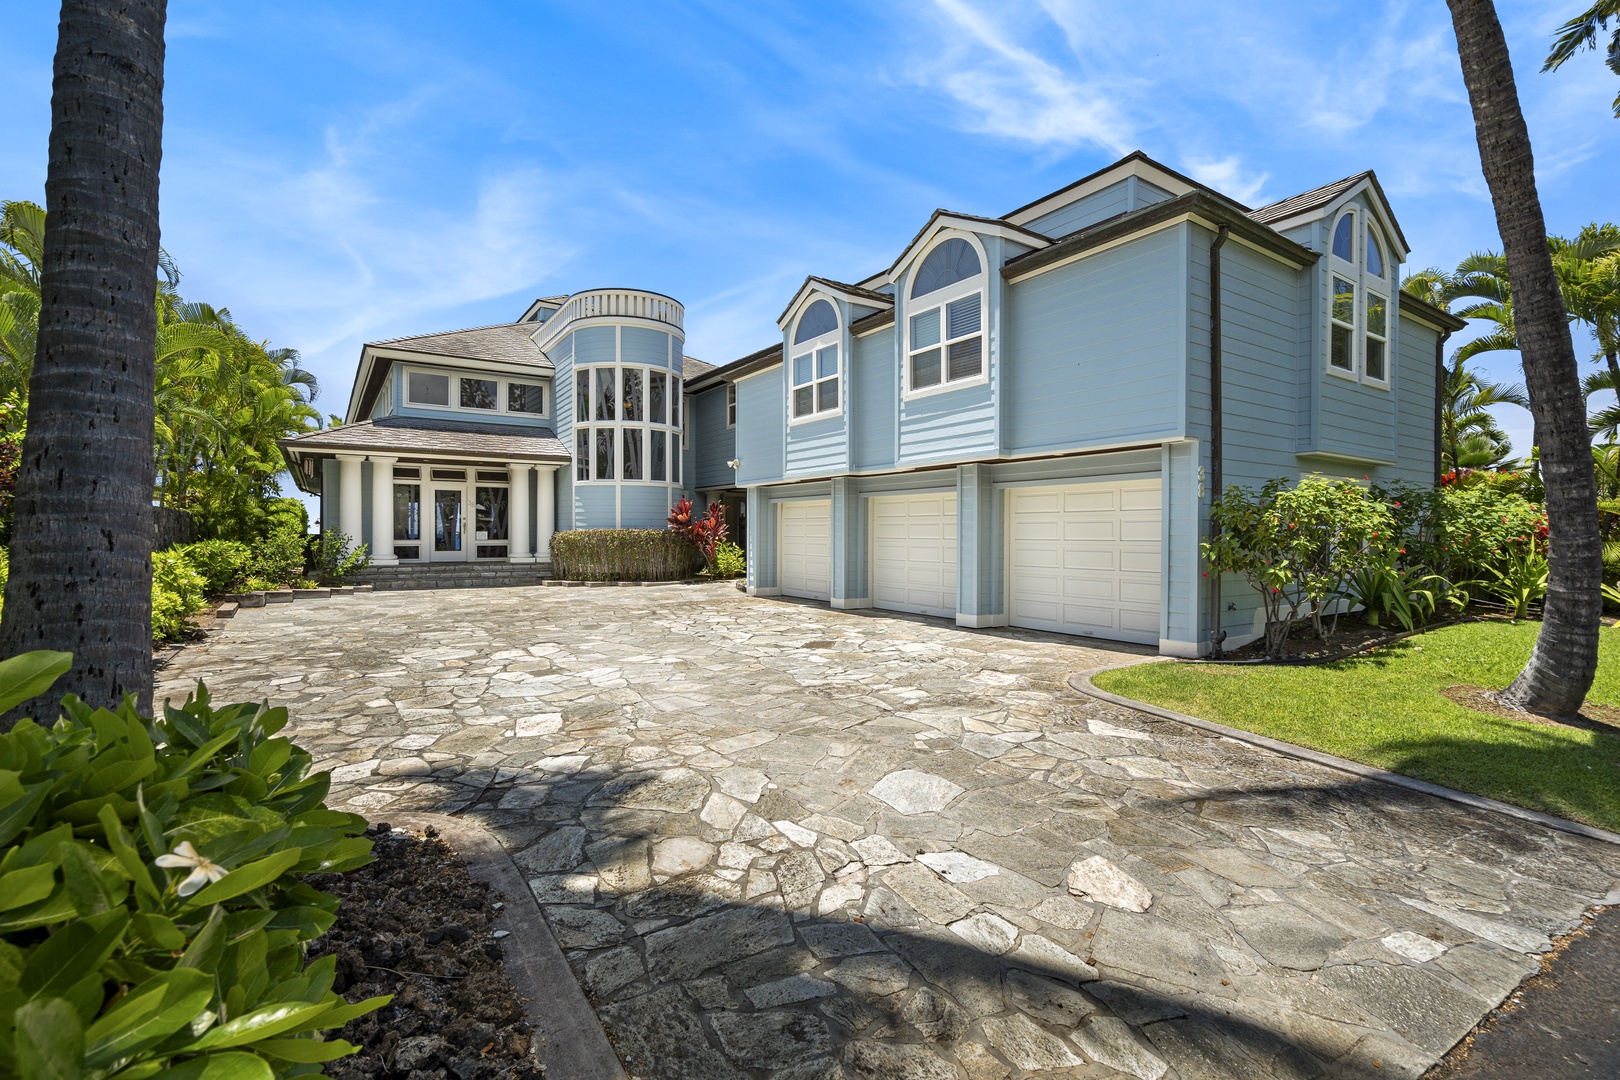 Kailua Kona Vacation Rentals, Kona Blue - Expansive driveway able to accommodate up to 6 cars comfortably